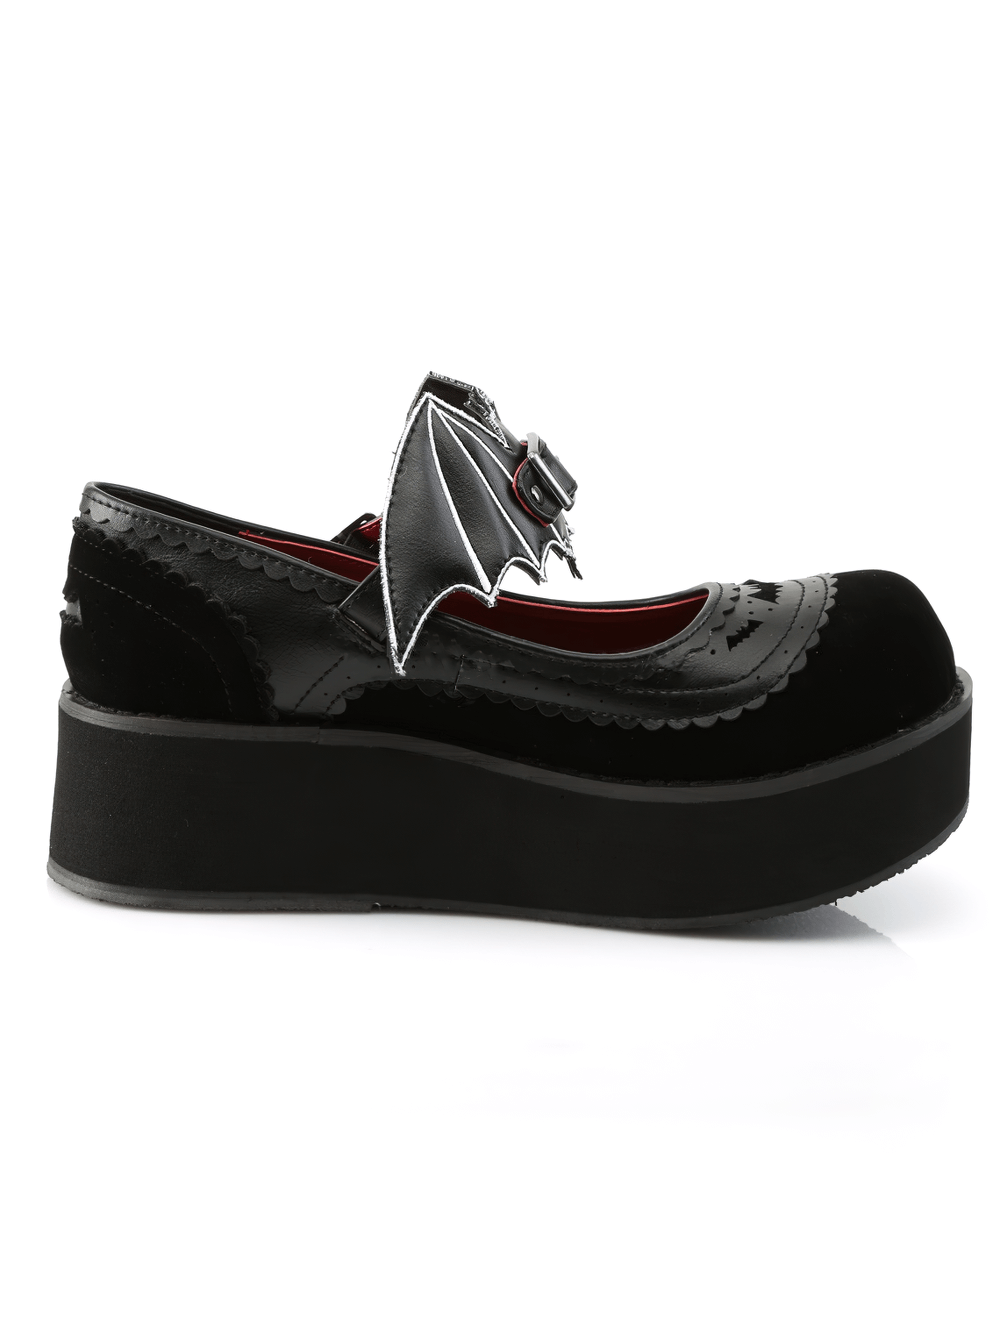 DEMONIA Gothic Mary Jane Platforms Shoes with Bat Detail